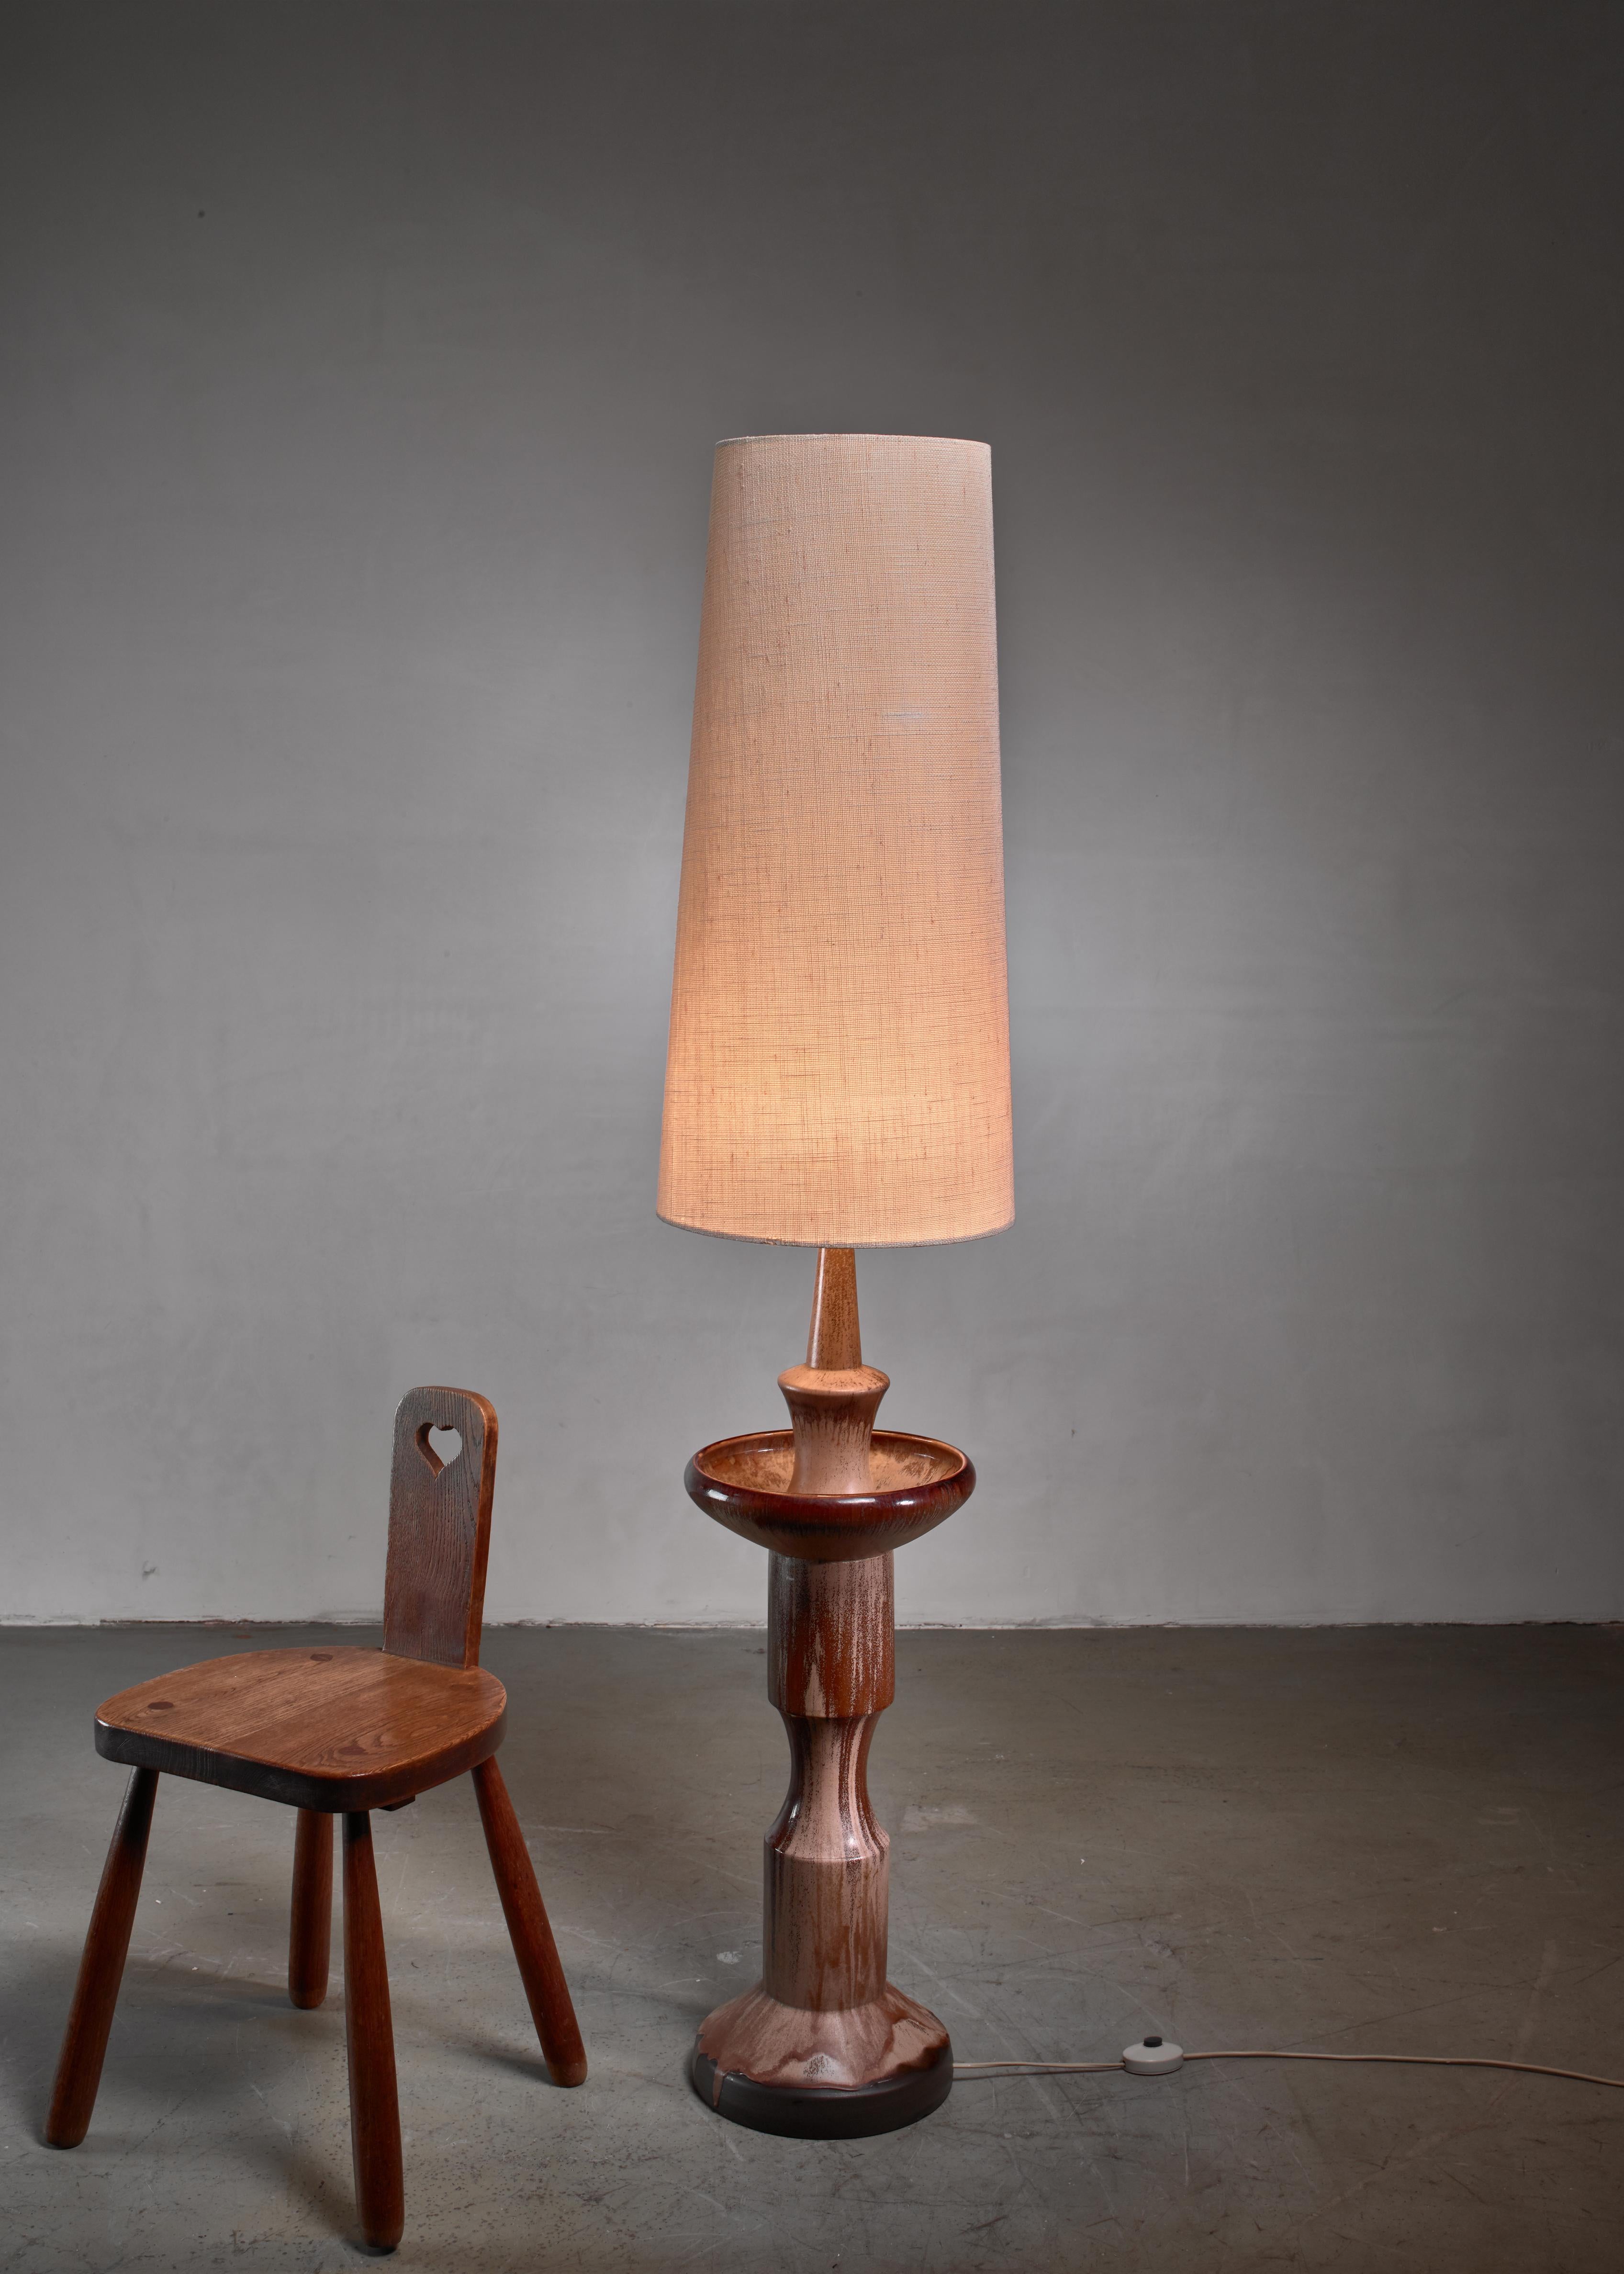 A large sculptural, Danish modern ceramic floor lamp with an earth tone glazing.

The measurements stated are of the lamp without a shade. The shade is newly made, other dimensions are available upon request.

       